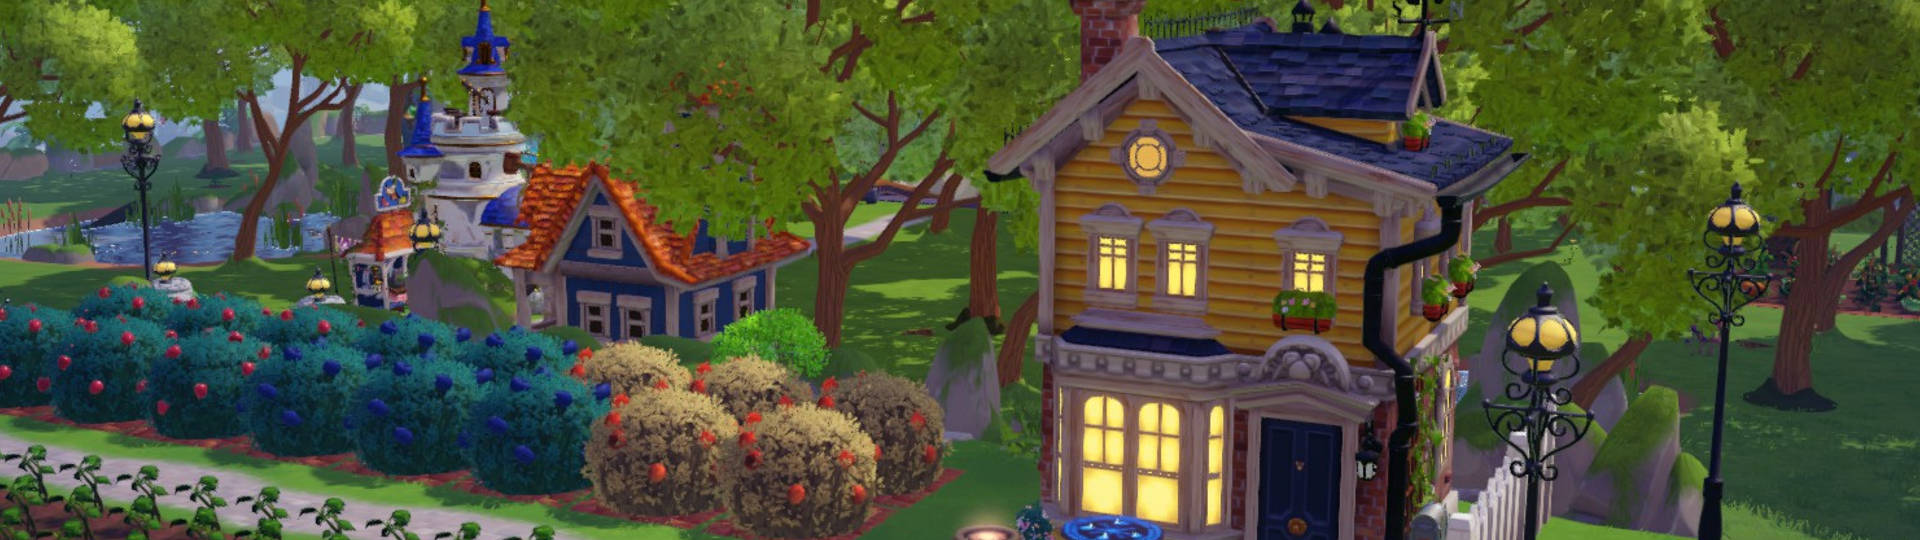 Disney Dreamlight Valley Building Guide - Player Home and Berry Bushes